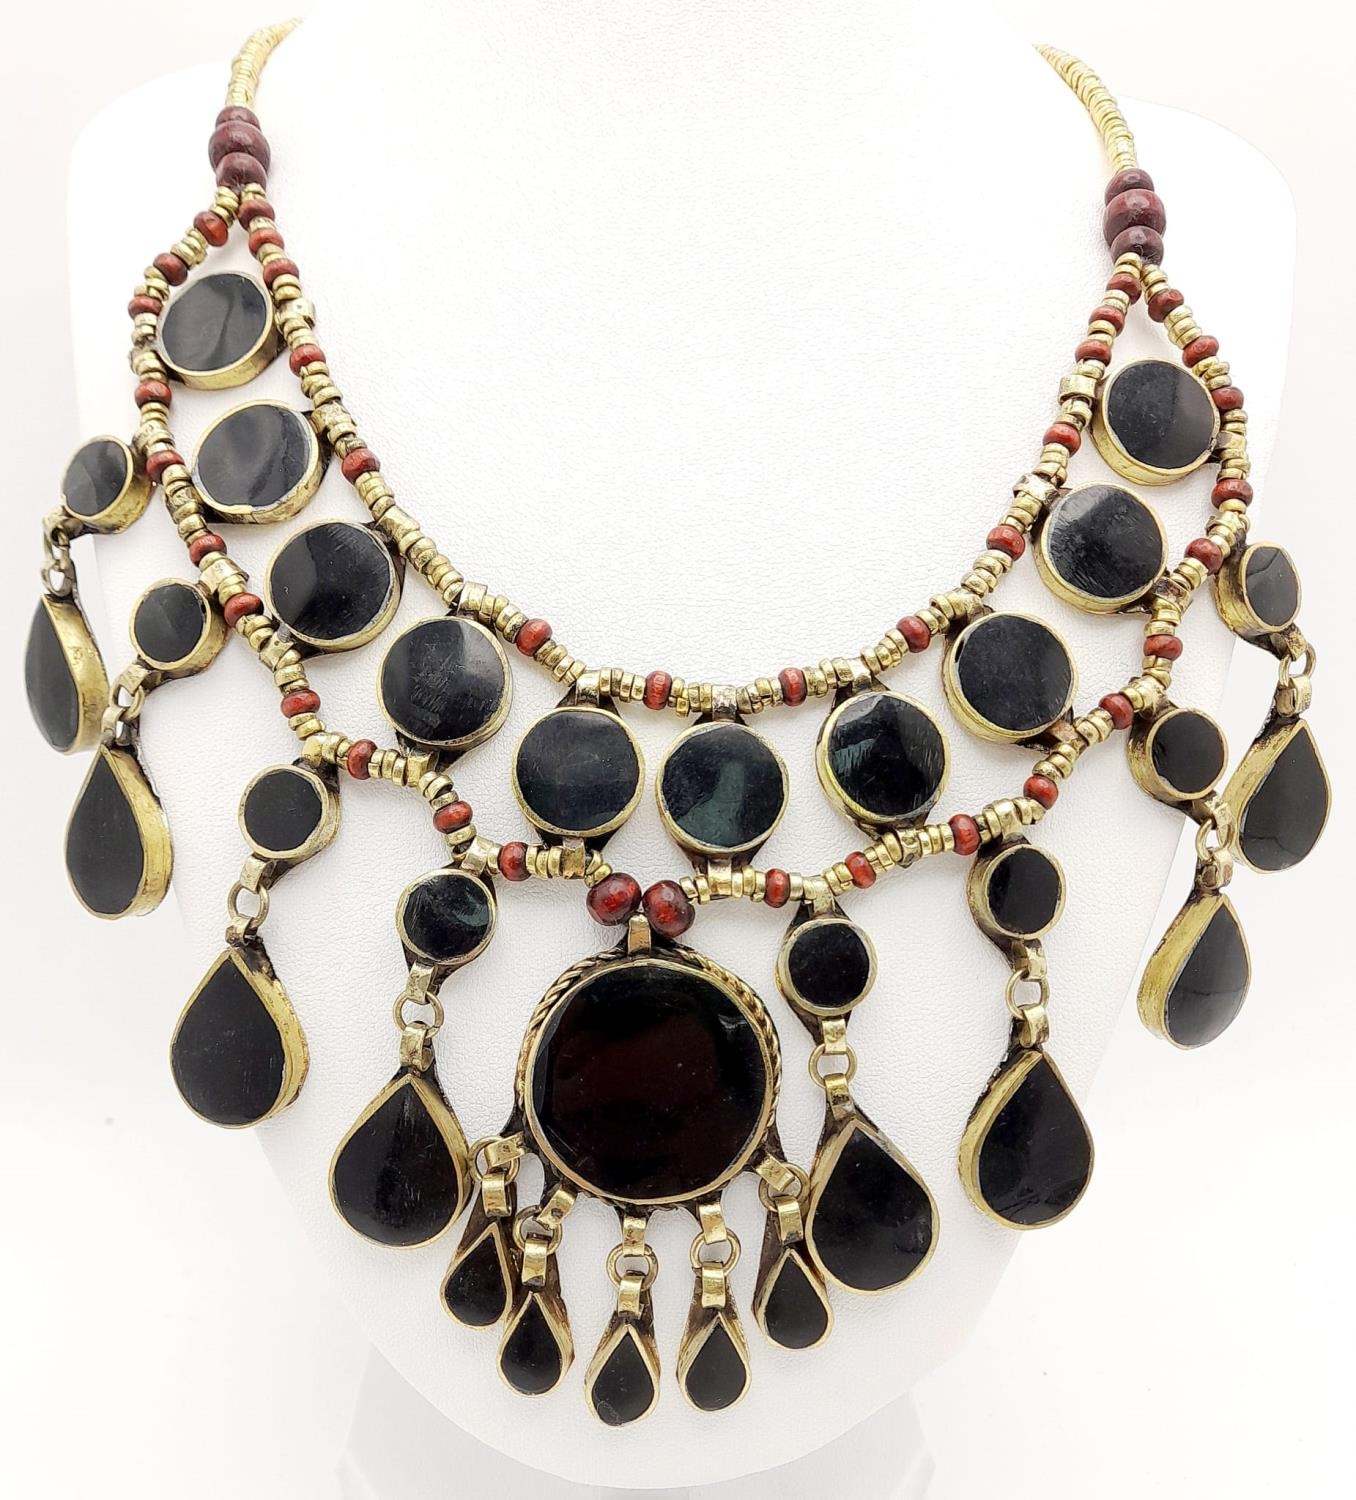 A Black Agate Jewellery Set: Cuff bangle, drop earrings and necklace - 42cm. - Image 2 of 7